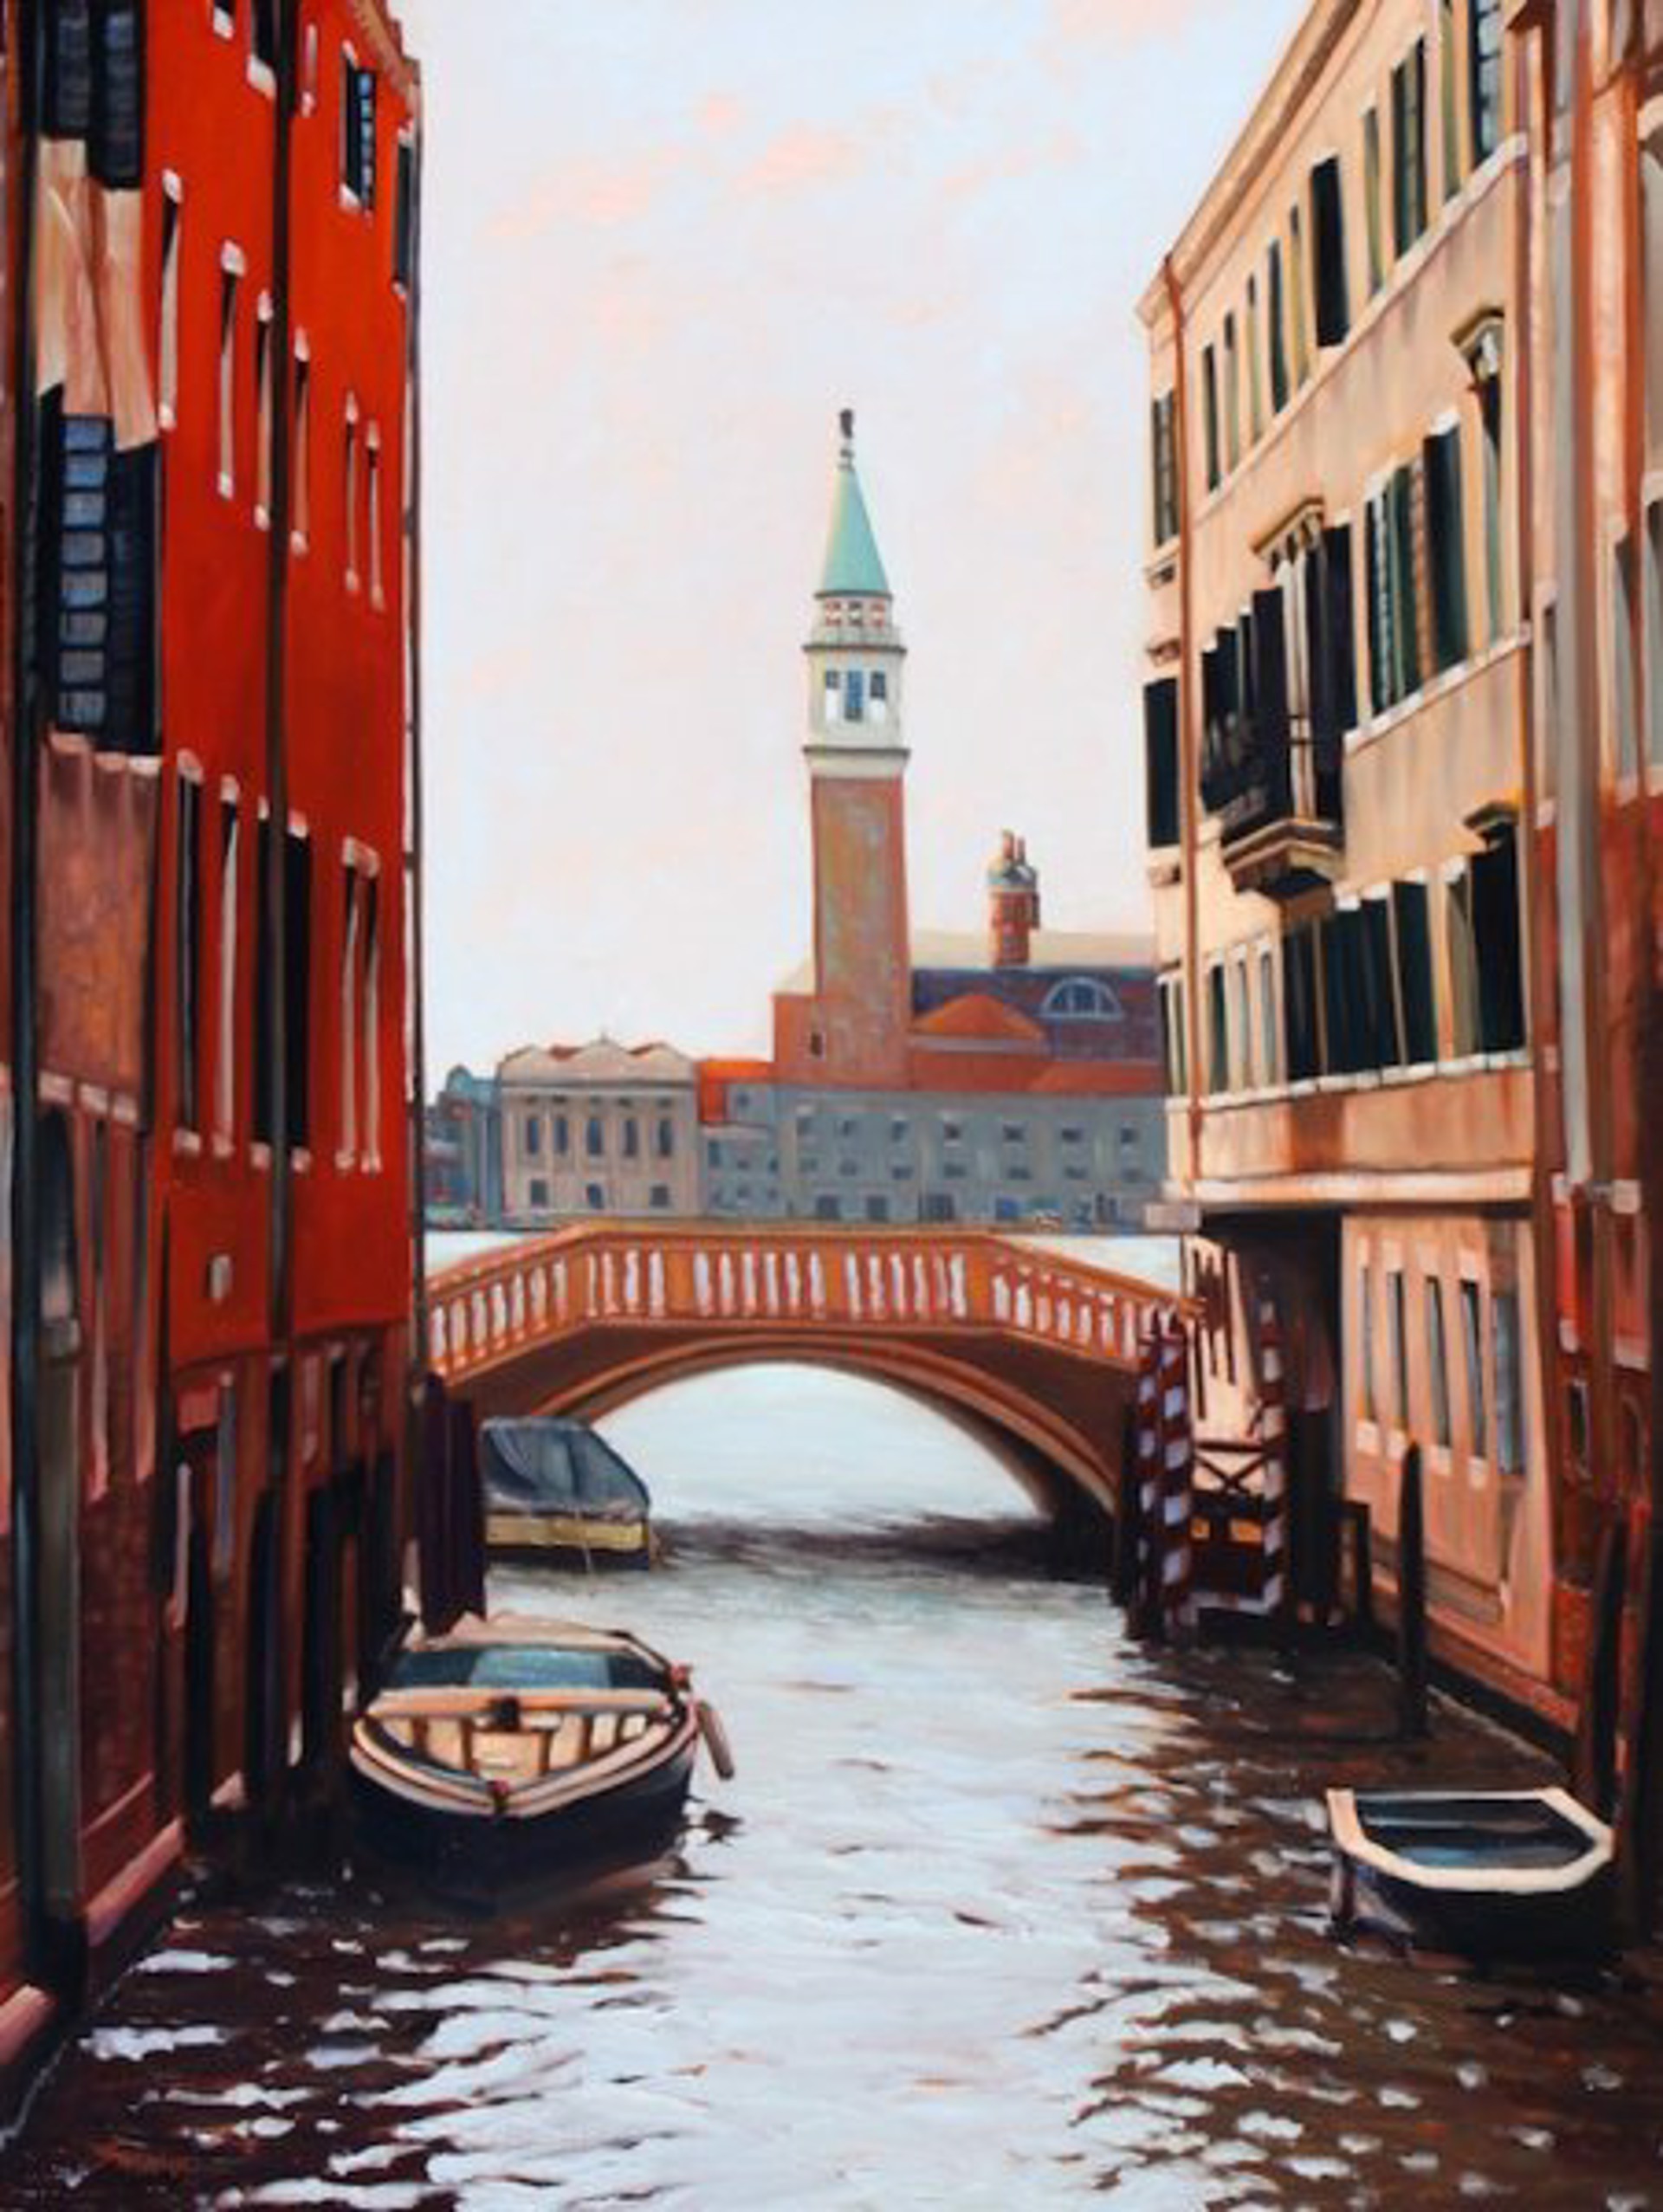 Across The Grand Canal by Tom Swimm